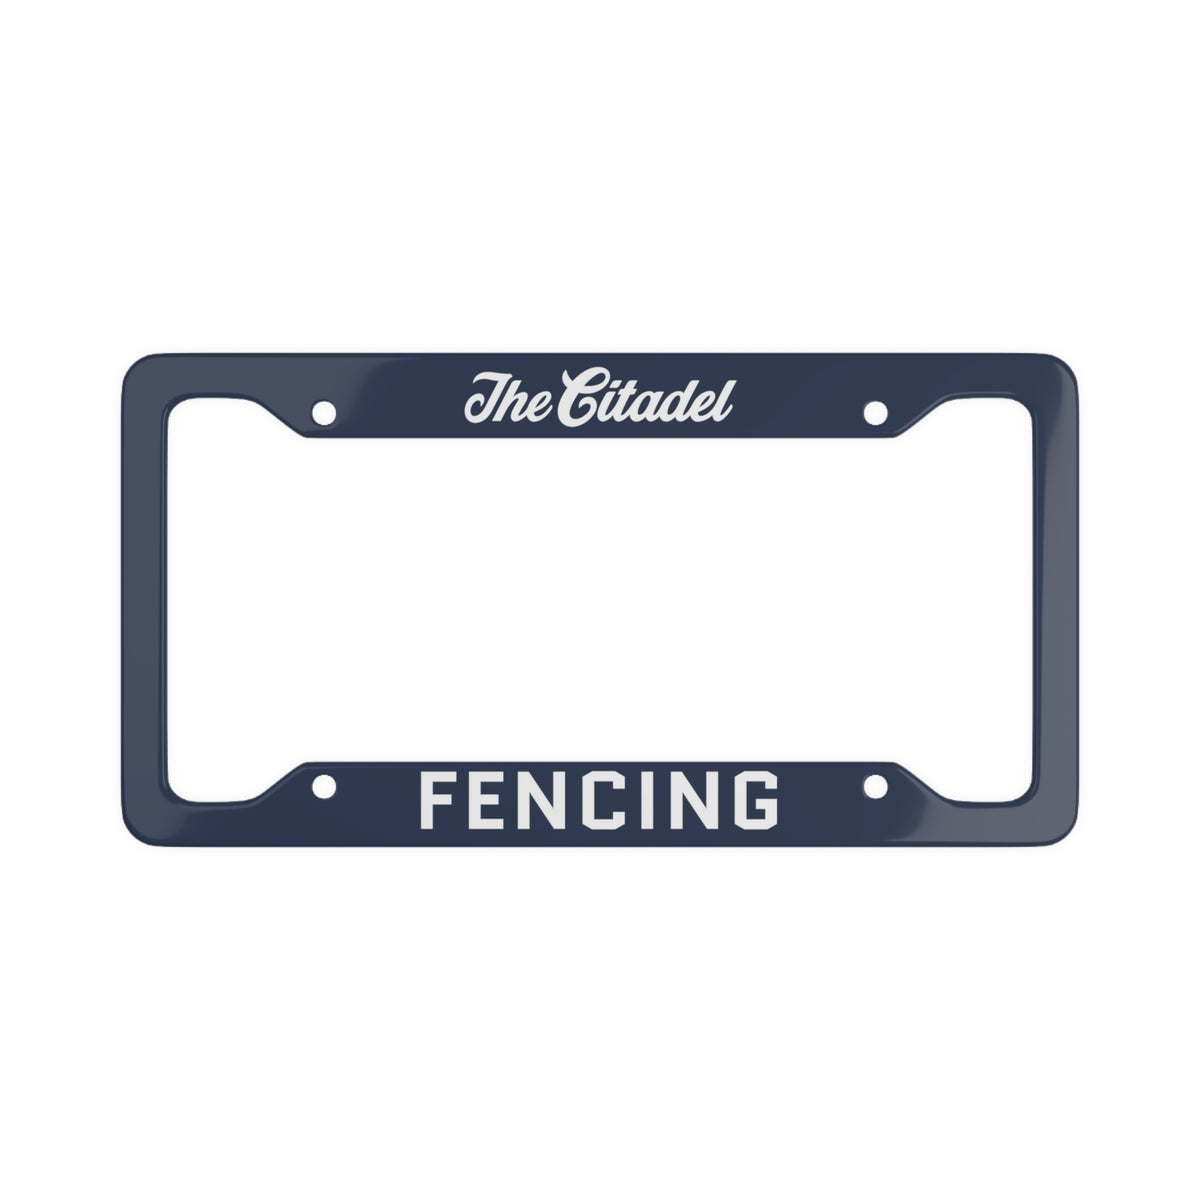 The Citadel, Word Mark, Club Sports, Fencing License Plate Frame